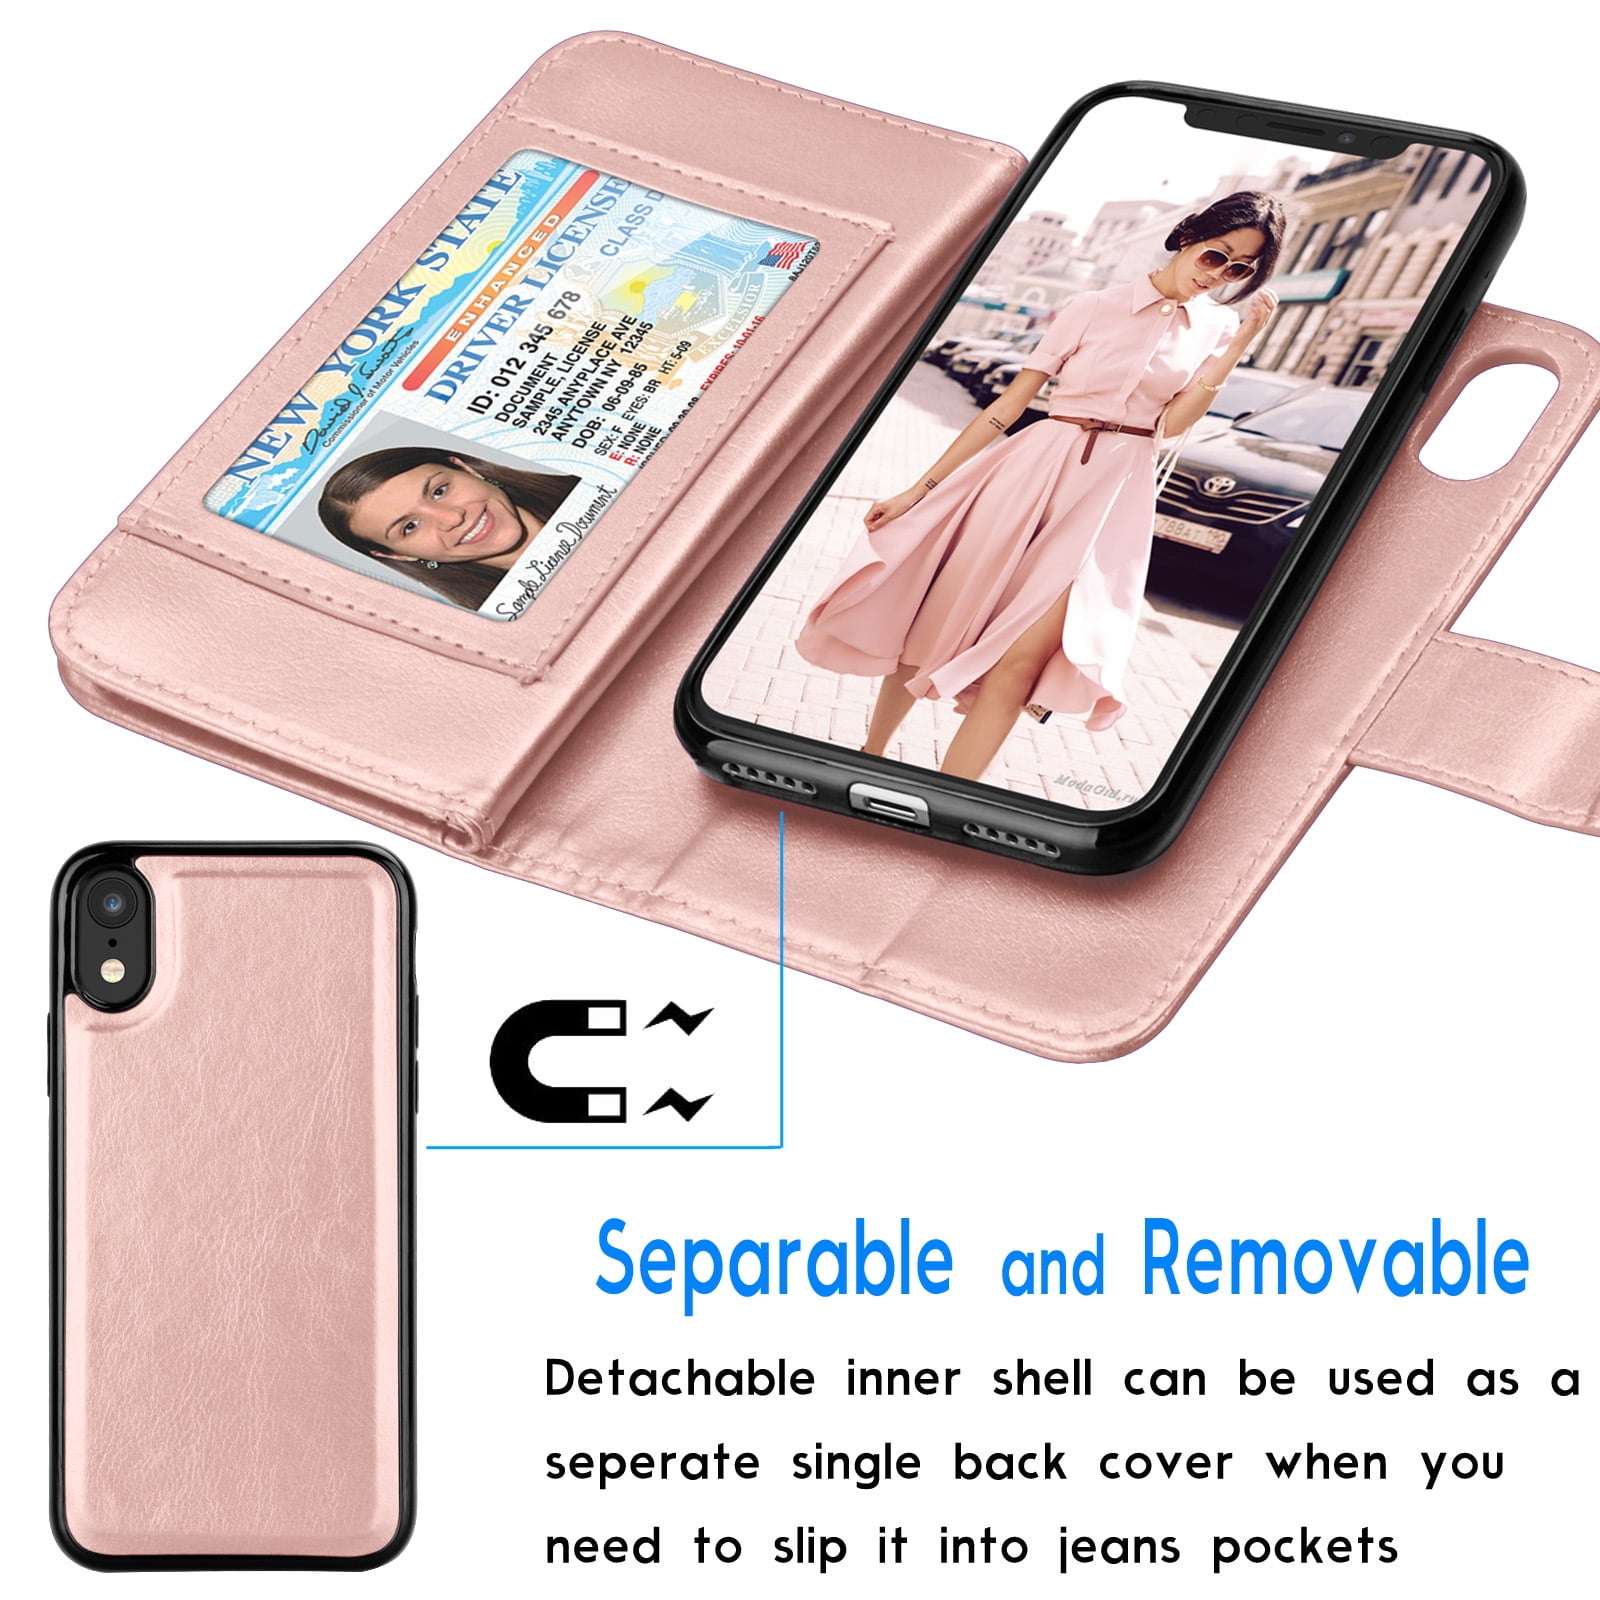 Buy Phone Case for iPhone Xs MAX, Classic Style Elegant Luxury Fashion  Designer Wallet Lanyard Case with Card Holder Case Cover iPhone Xs MAX- -  US Fast Deliver Guarantee FBA Online at